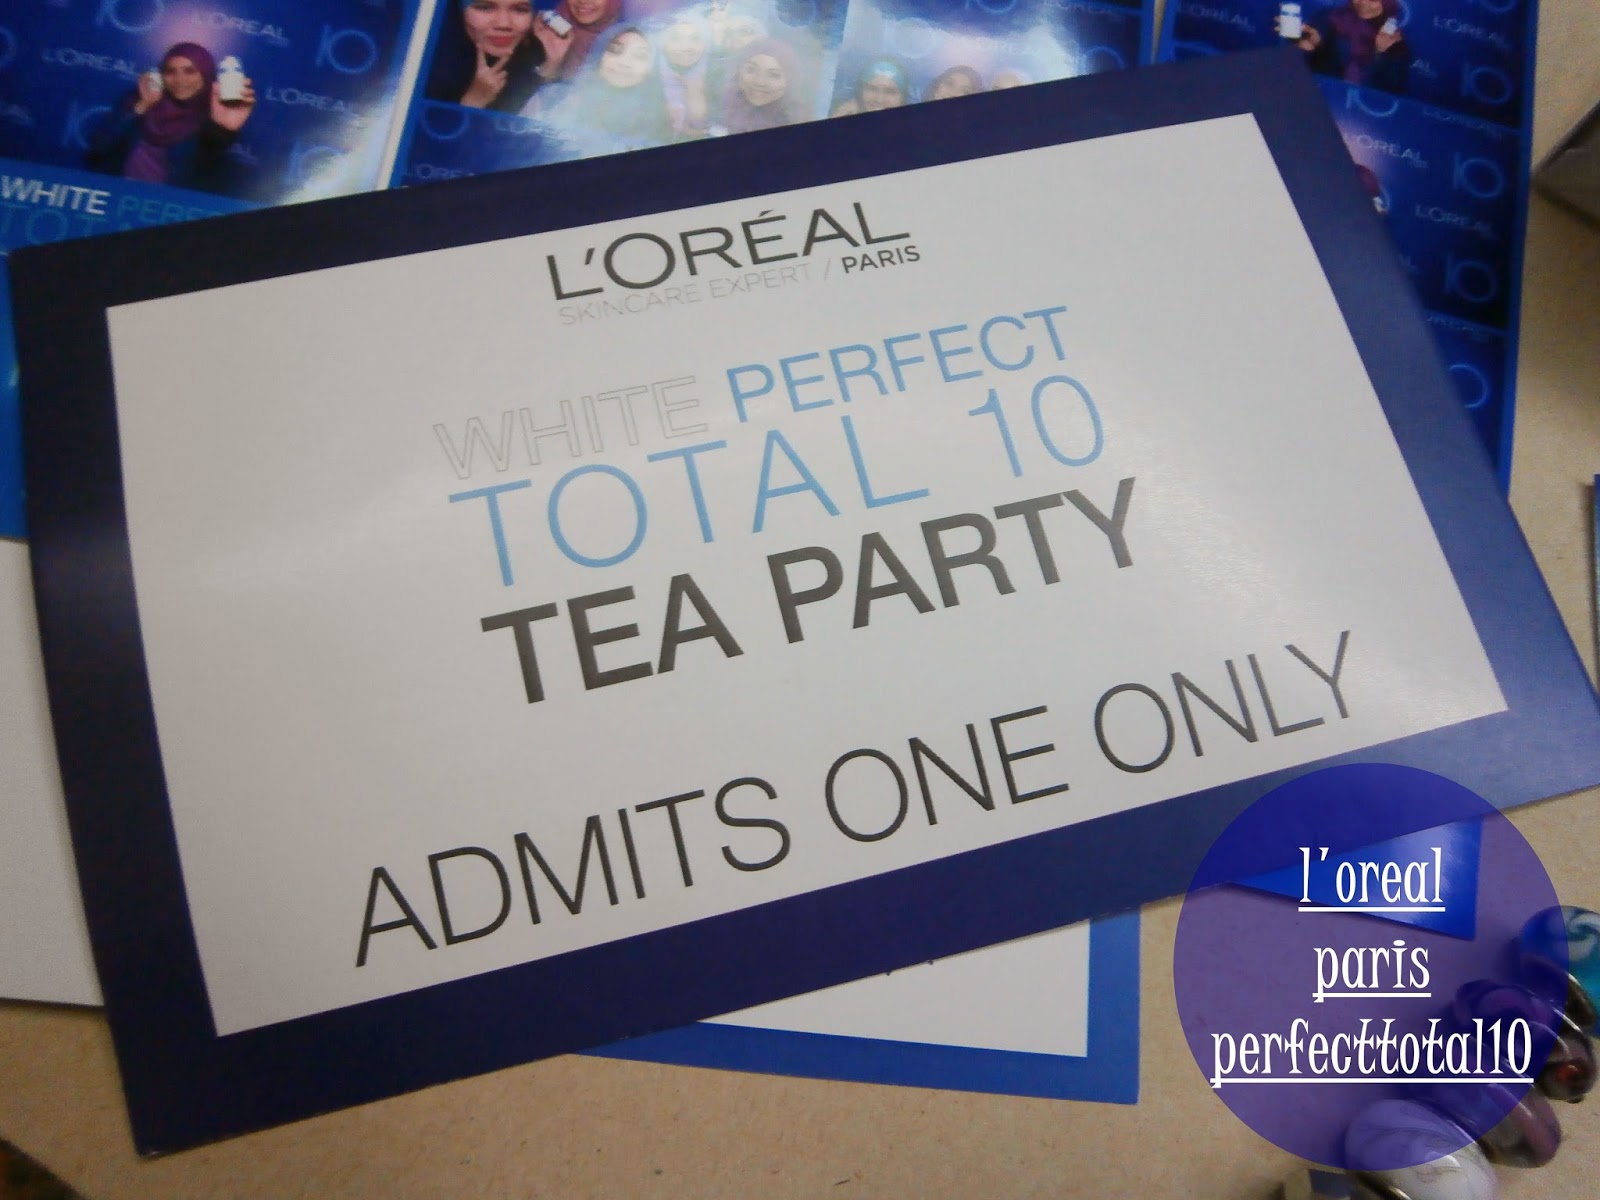 Hannah Sytieh : Event Loreal White Perfect Total 10 yg 